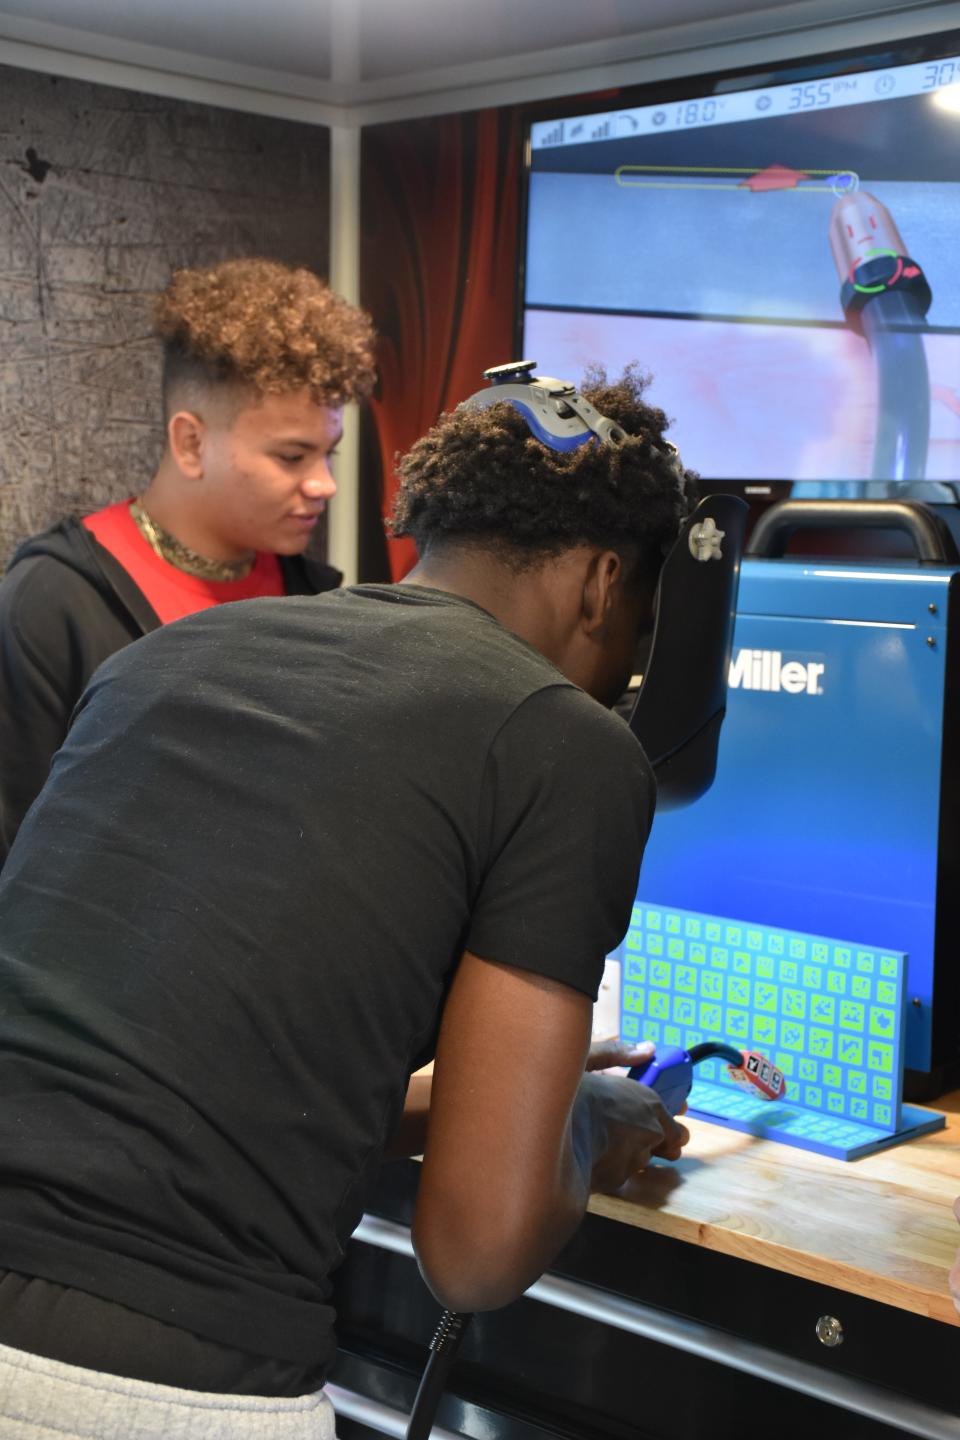 Students onboard the mobile workshop often compete for the highest score on the virtual reality trades simulators.